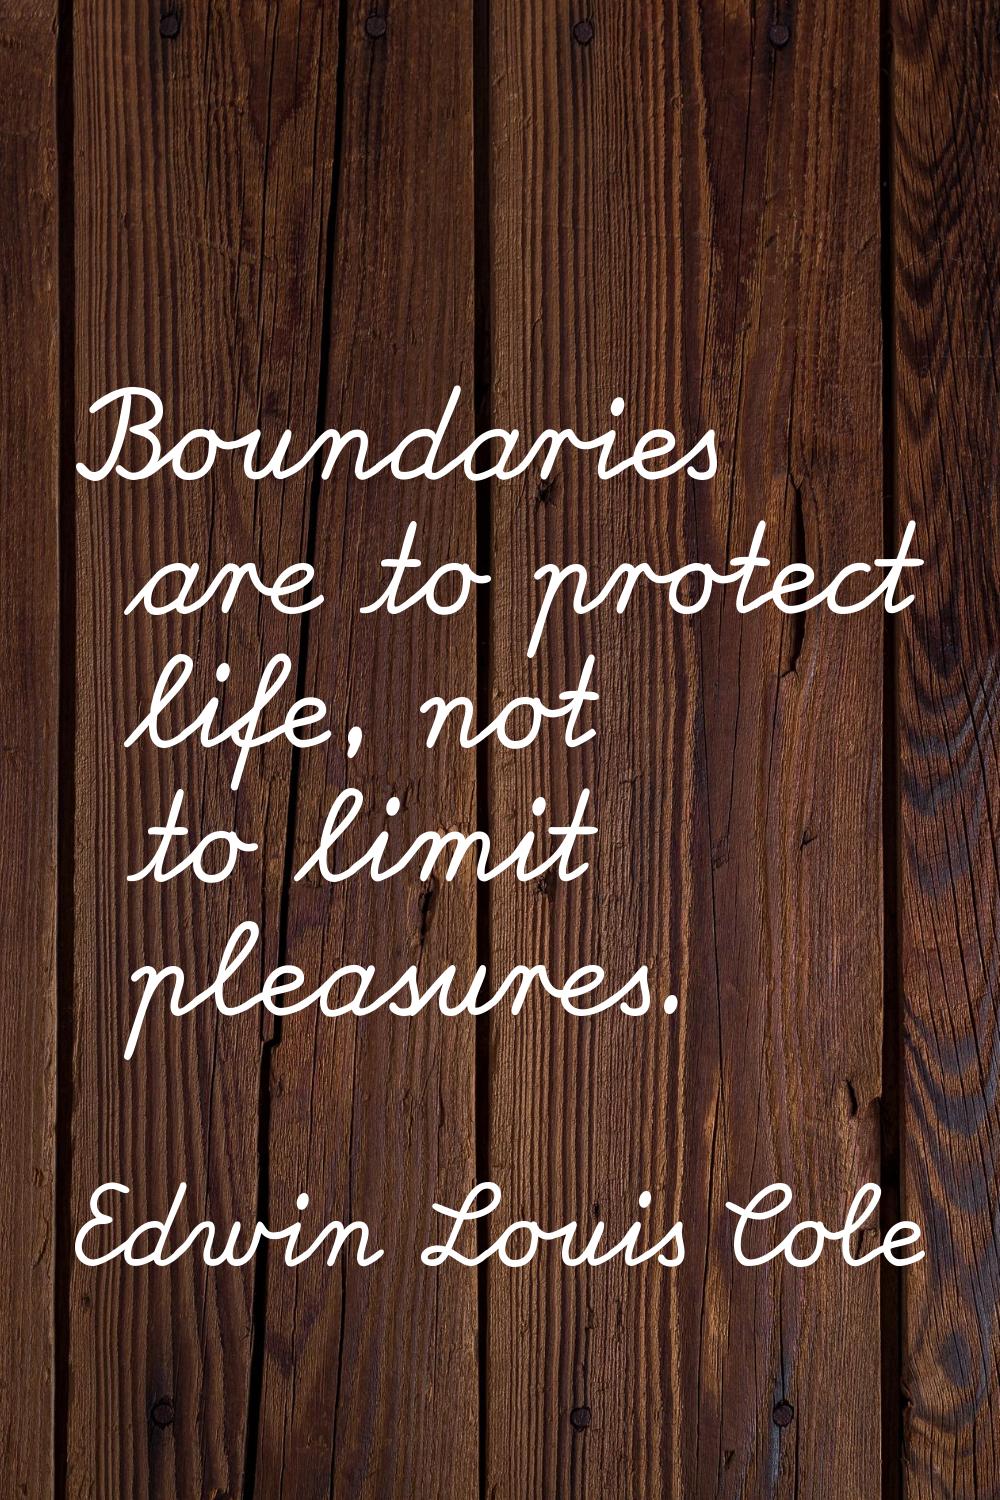 Boundaries are to protect life, not to limit pleasures.